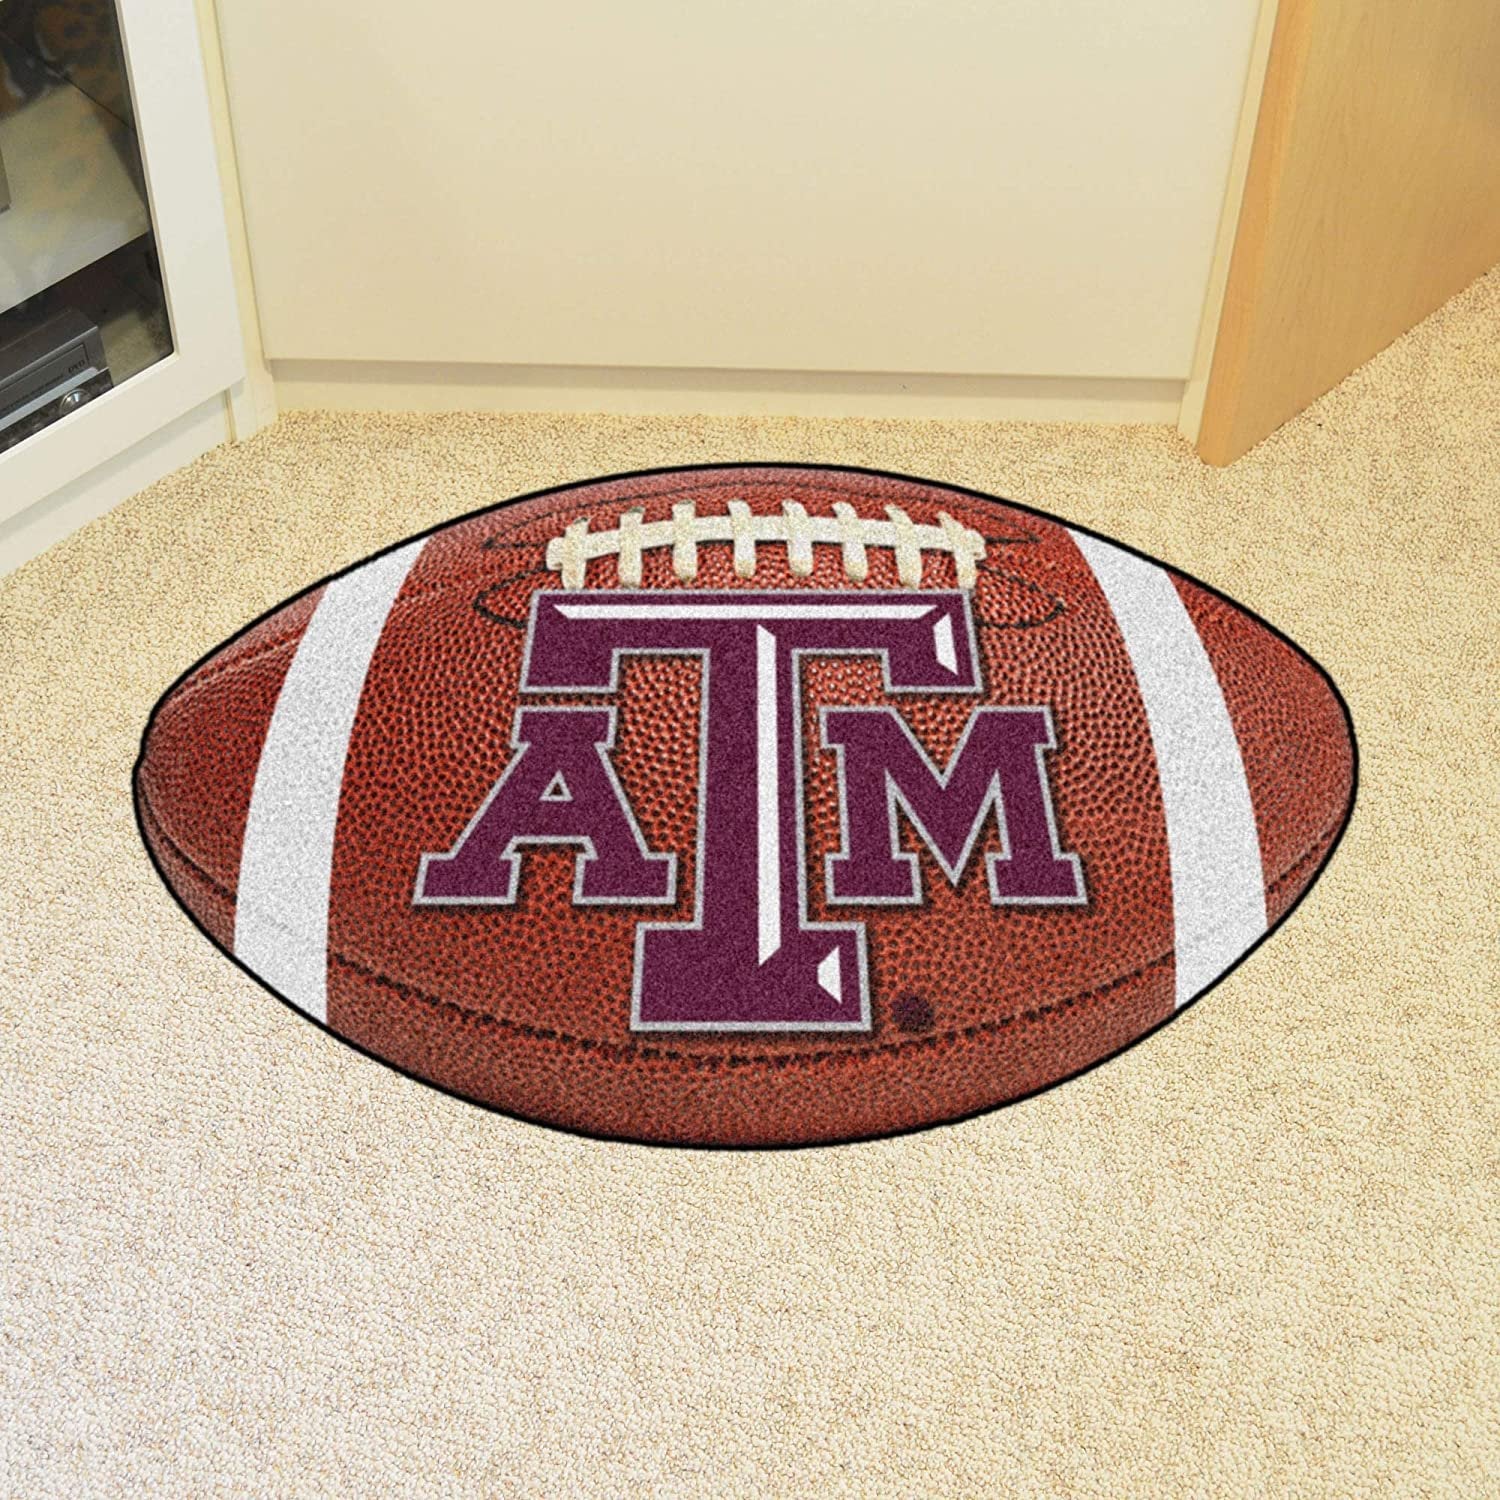 University of Texas A&M Aggies Floor Mat Area Rug, 20x32 Inch, Non-Skid Backing, Football Design